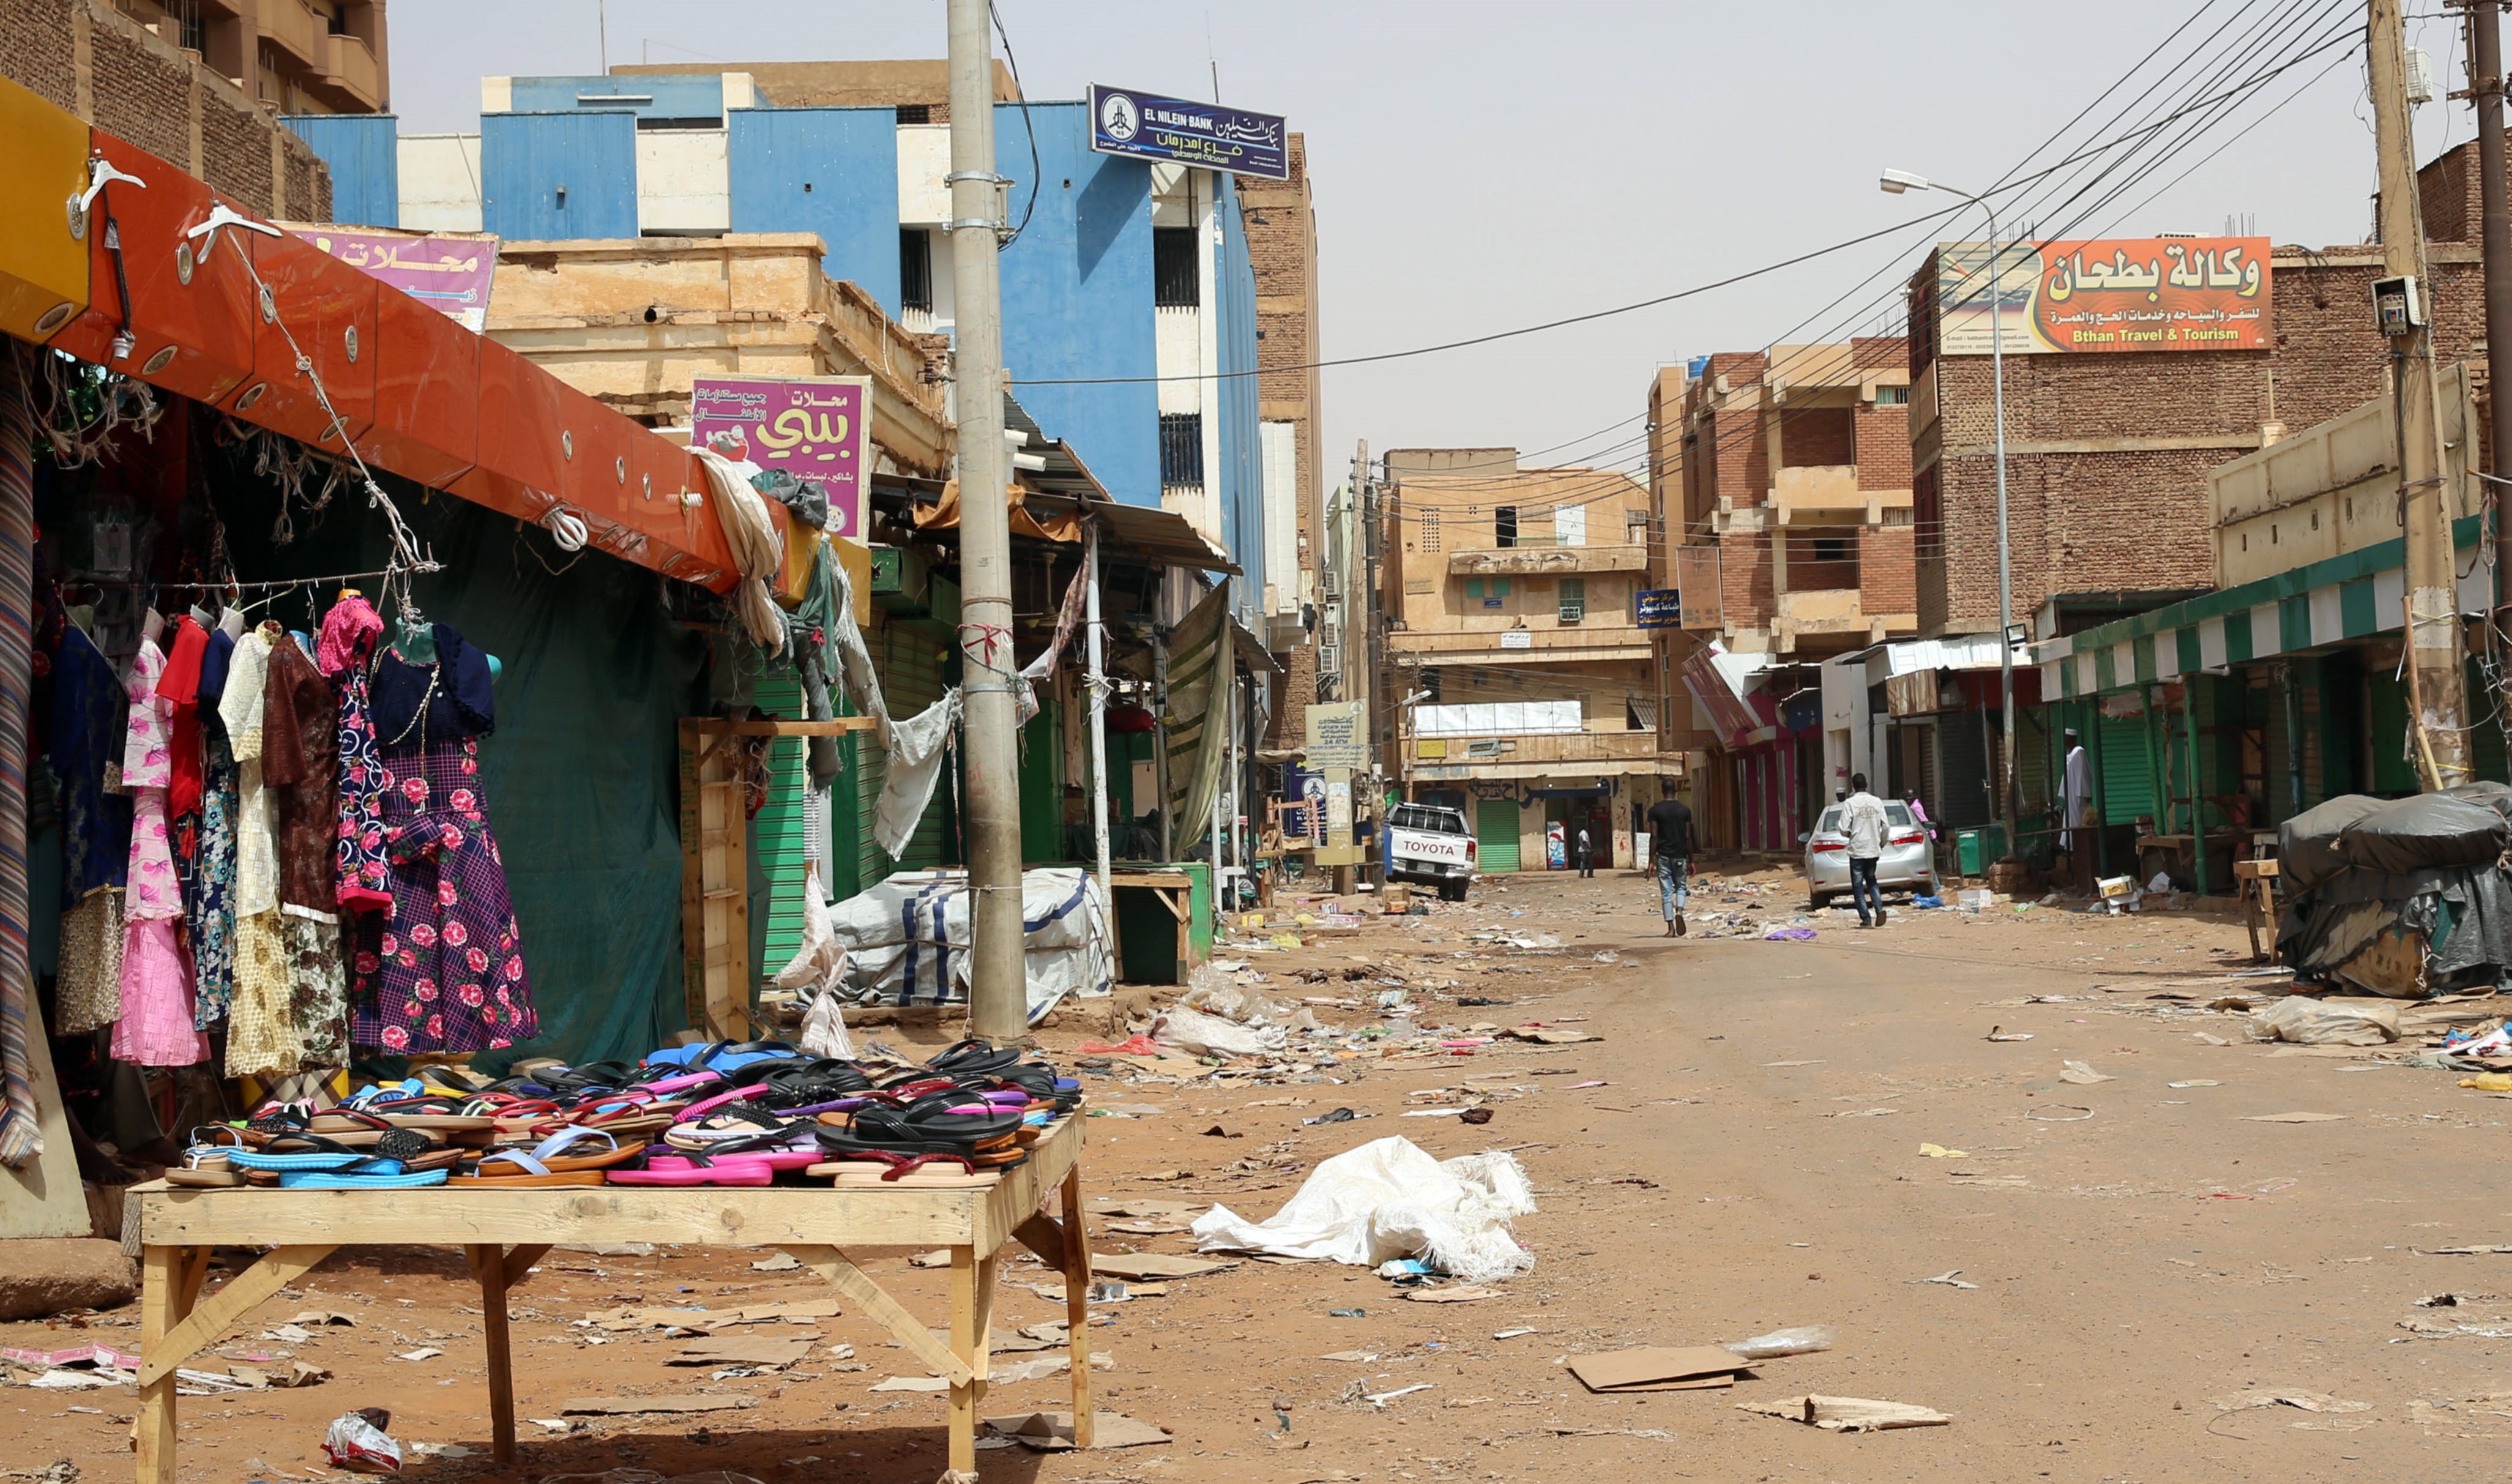 epa07636519 People walk down an empty street closed in the Omdurman market, near Khartoum, Sudan, 08 June 2019. Sudanese protest group called on demonstrators participating in the first day of the 'Civil Disobedience' campaign, which was called in the wake of a deadly attack on protesters.The Sudanese Professionals Association (SPA) said the campaign would run until a civilian government was put in charge by the country's ruling generals.  EPA/MARWAN ALI